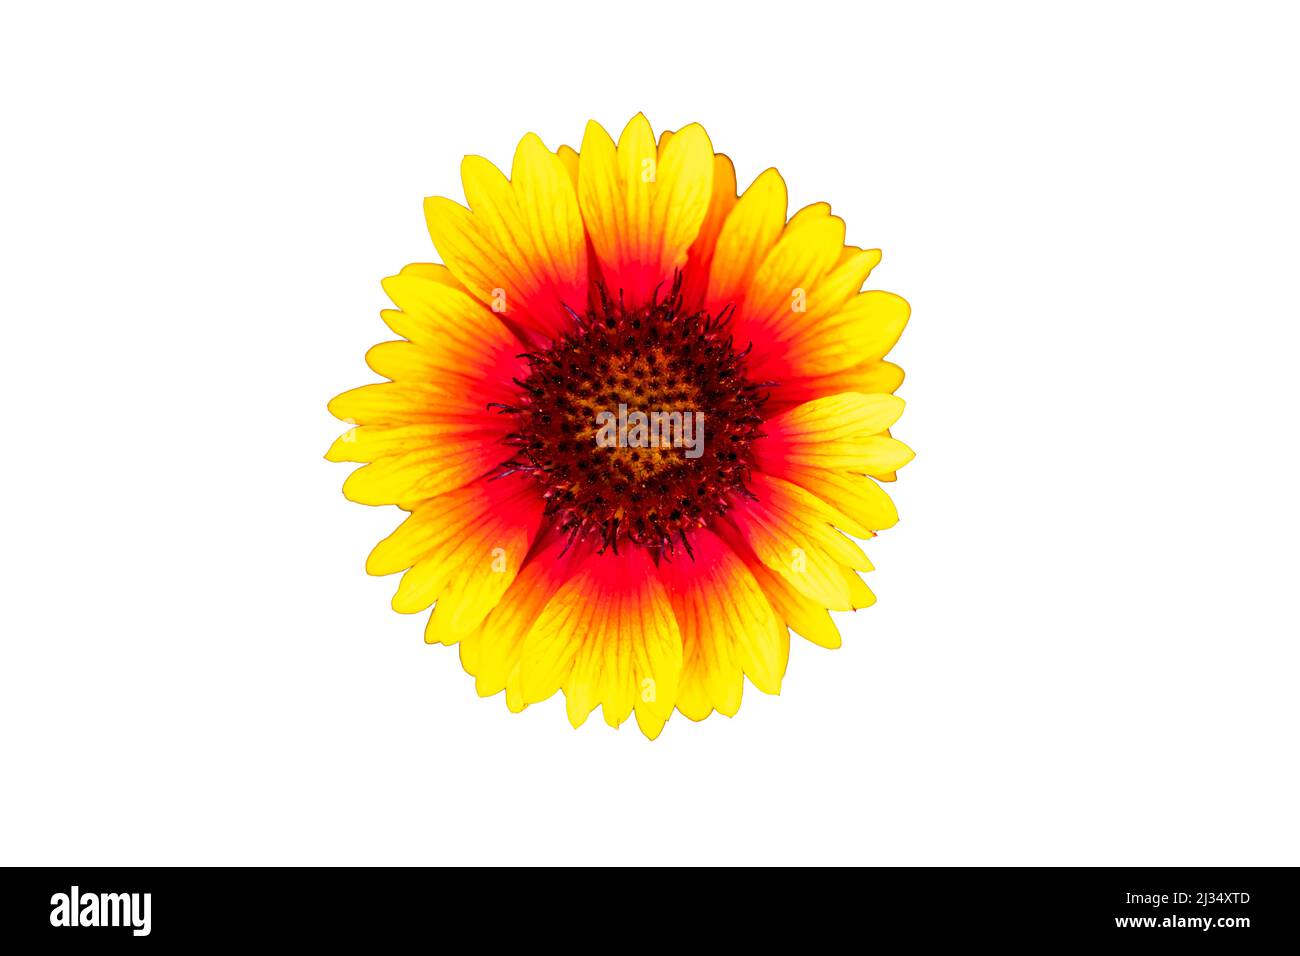 Beautiful, yellow and red blanket flower bloom, cutting out images Stock Photo